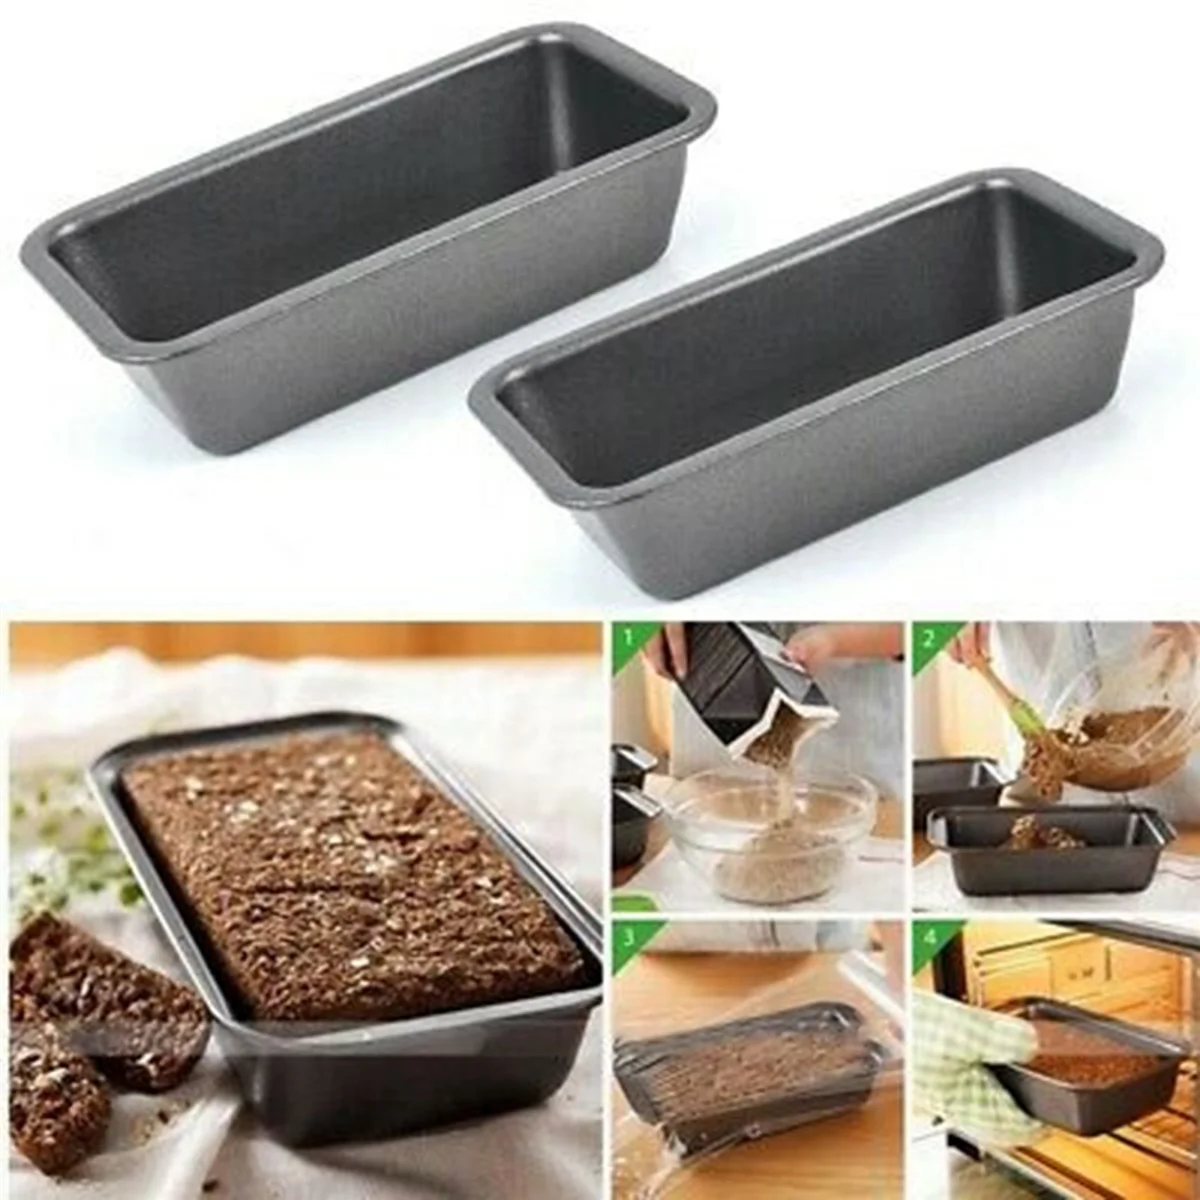 

2Pcs Bread Pans for Baking Nonstick Carbon Steel Loaf Pan Tray Toast Mold Cake Loaf Pastry Toast Box Baking Pan Bakeware